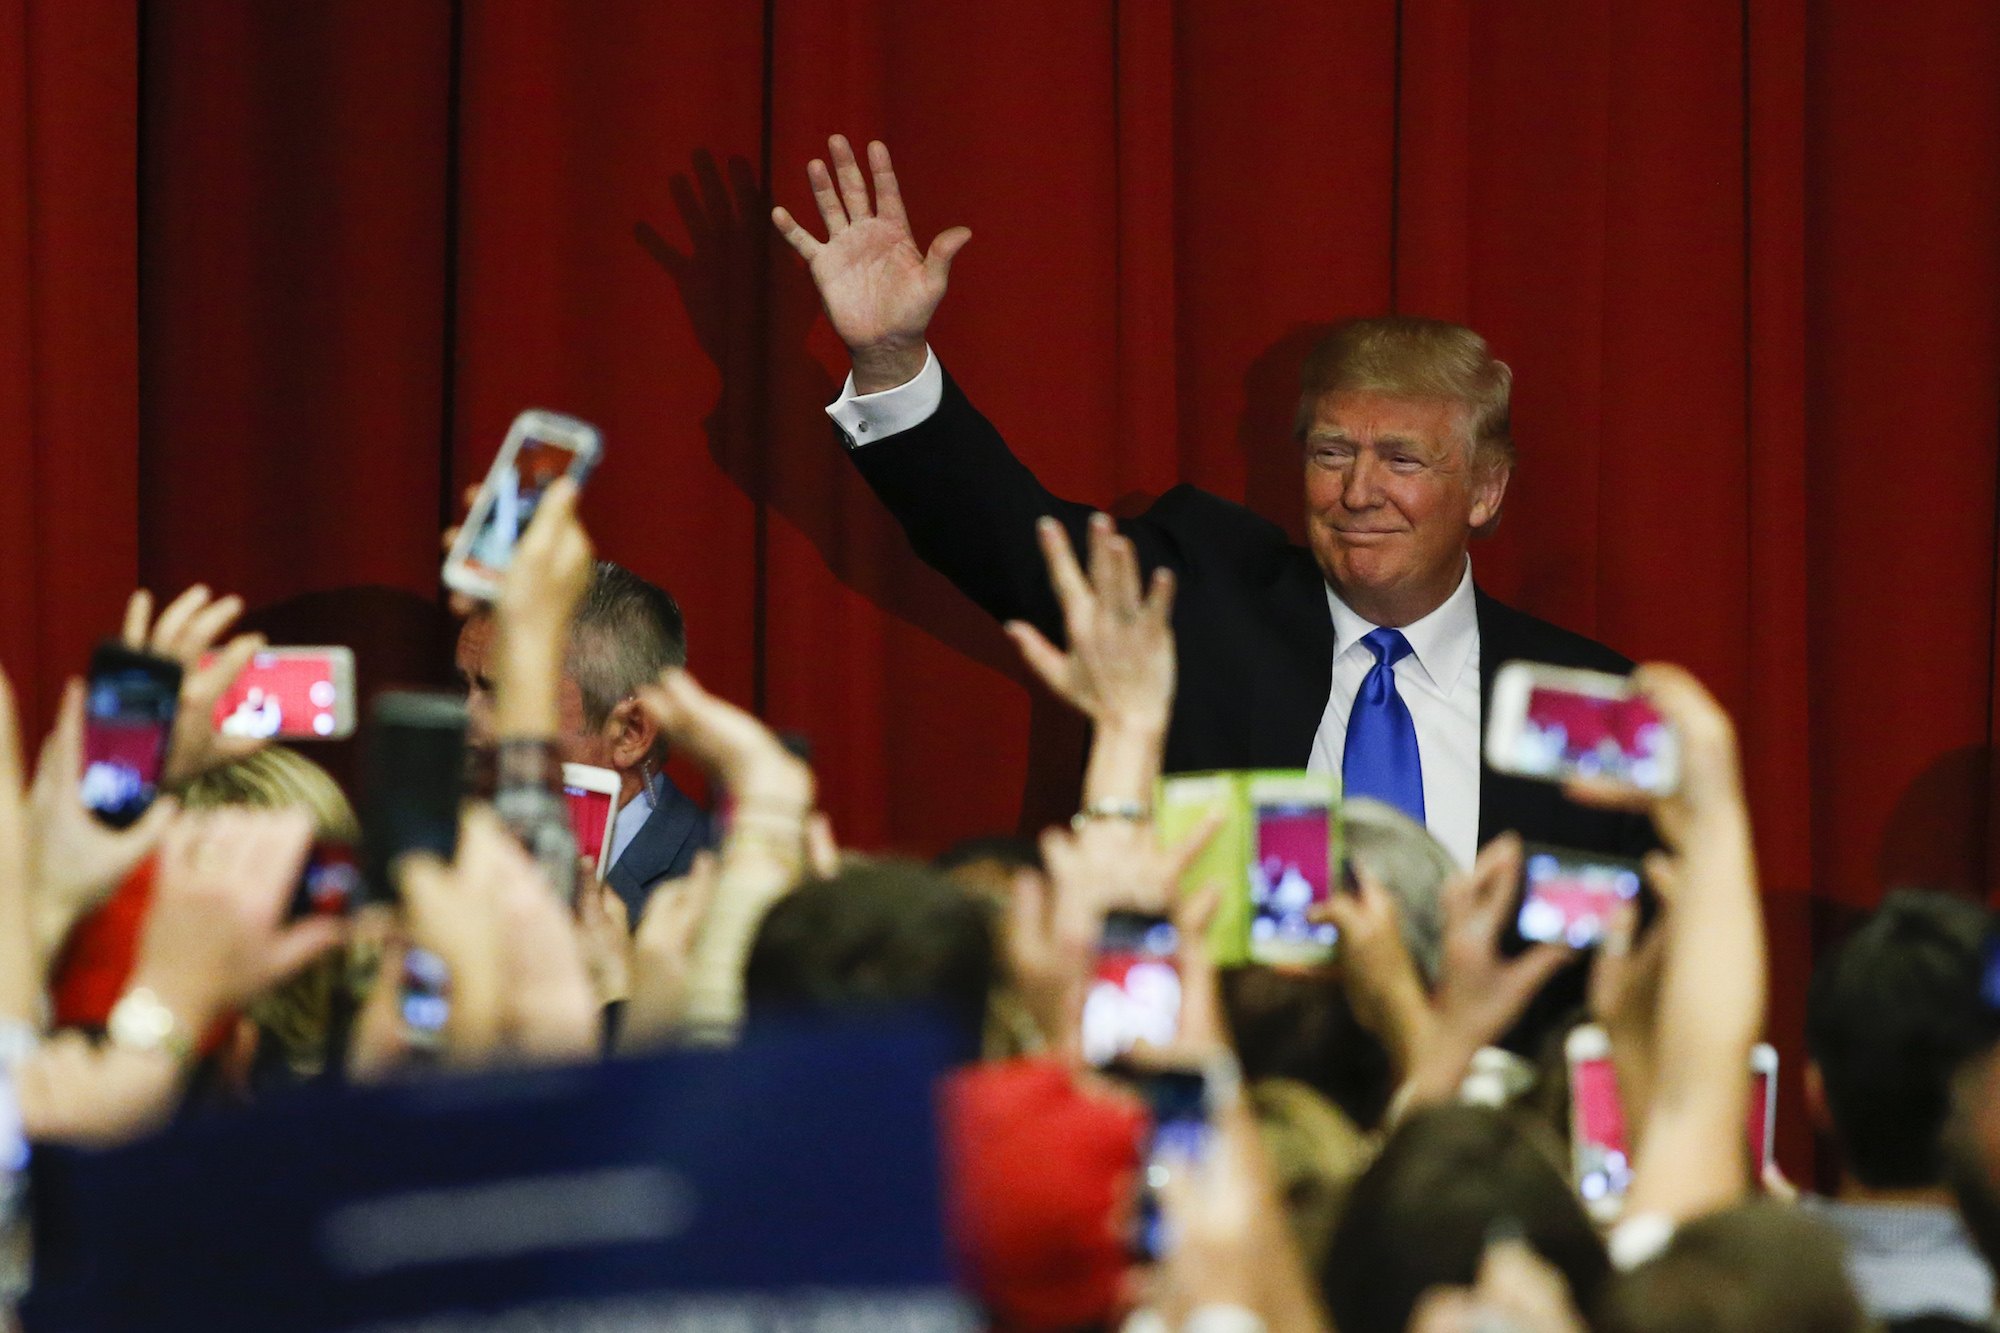 Donald Trump waves to the crowd at a fundraising event